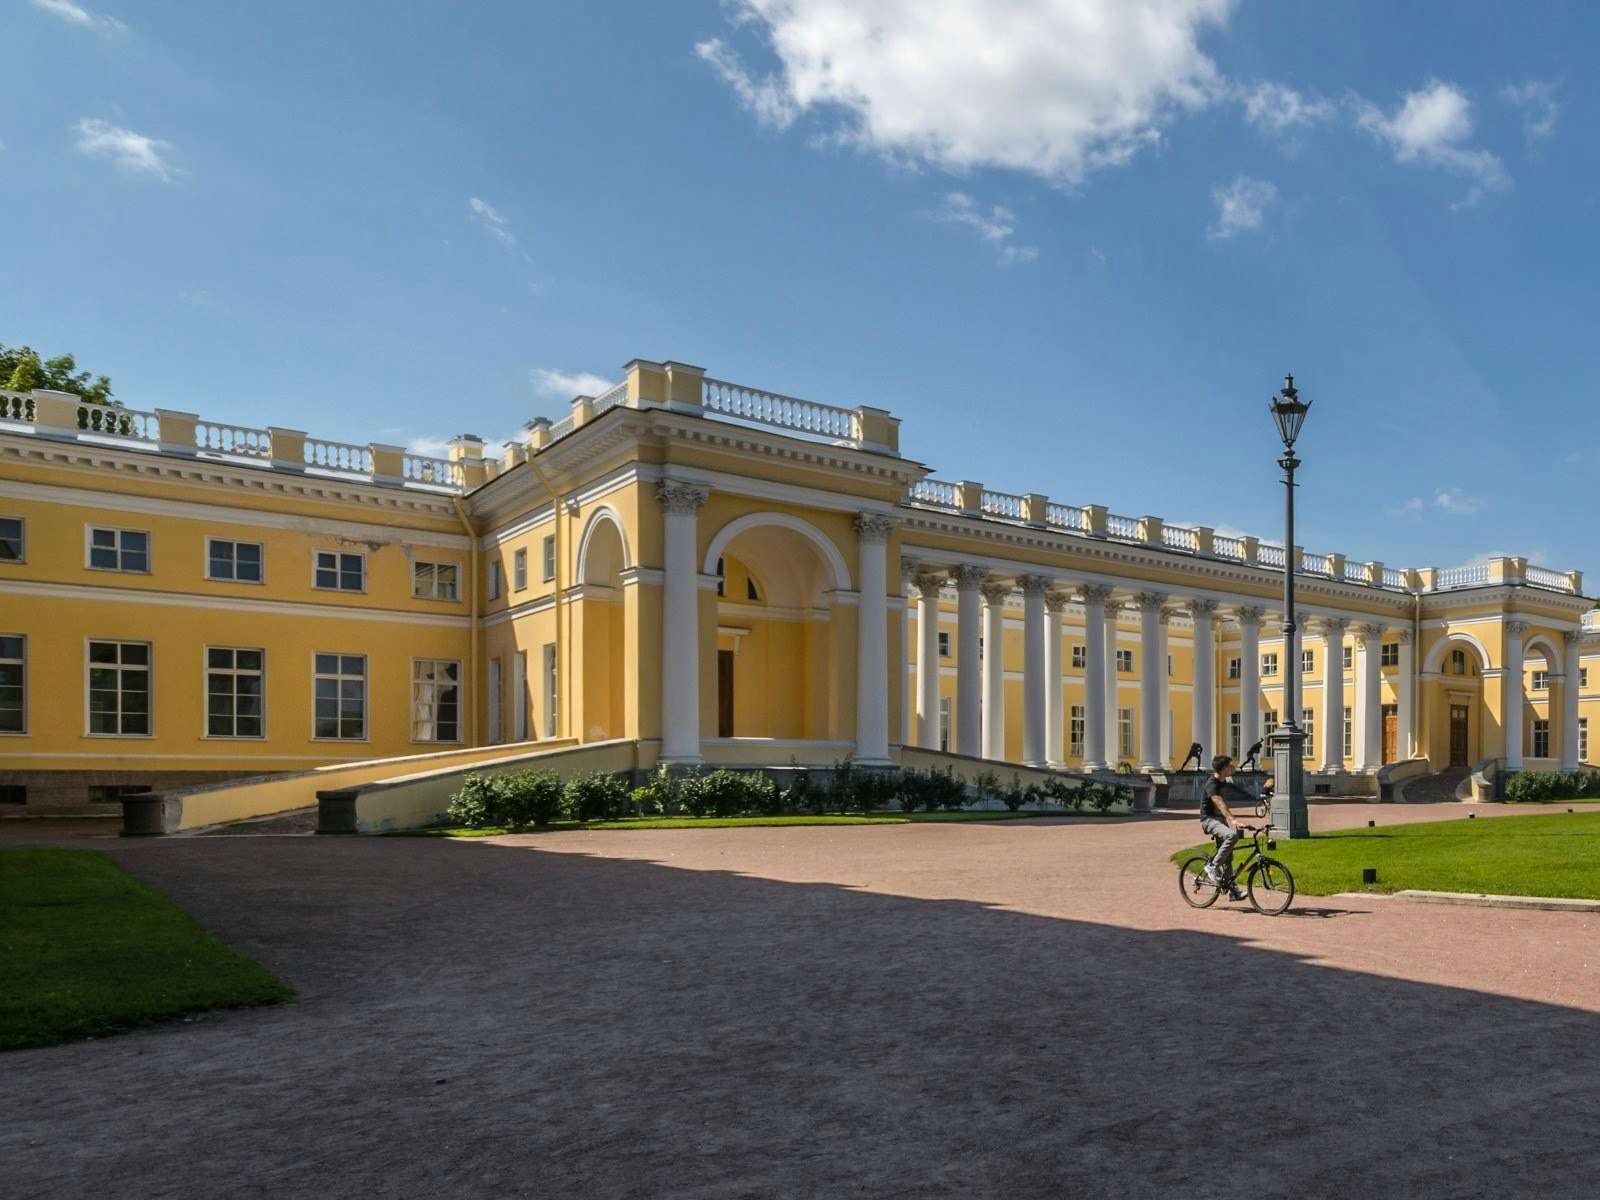 Alexander Palace in St Petersburg, Russia